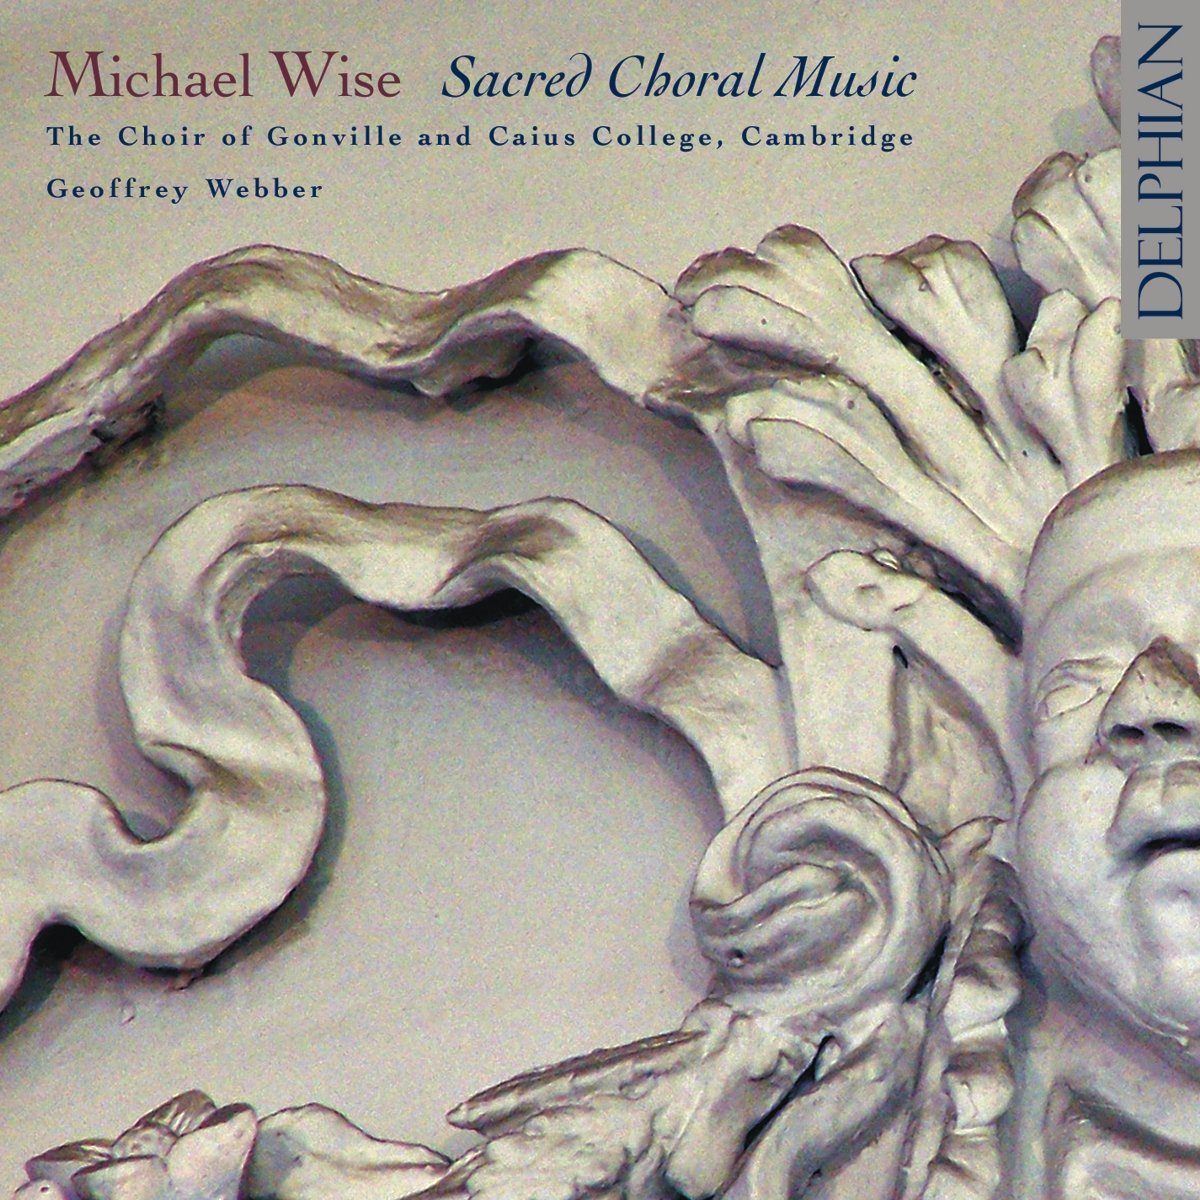 Michael Wise (c.1648–1687): Sacred Choral Music CD Delphian Records